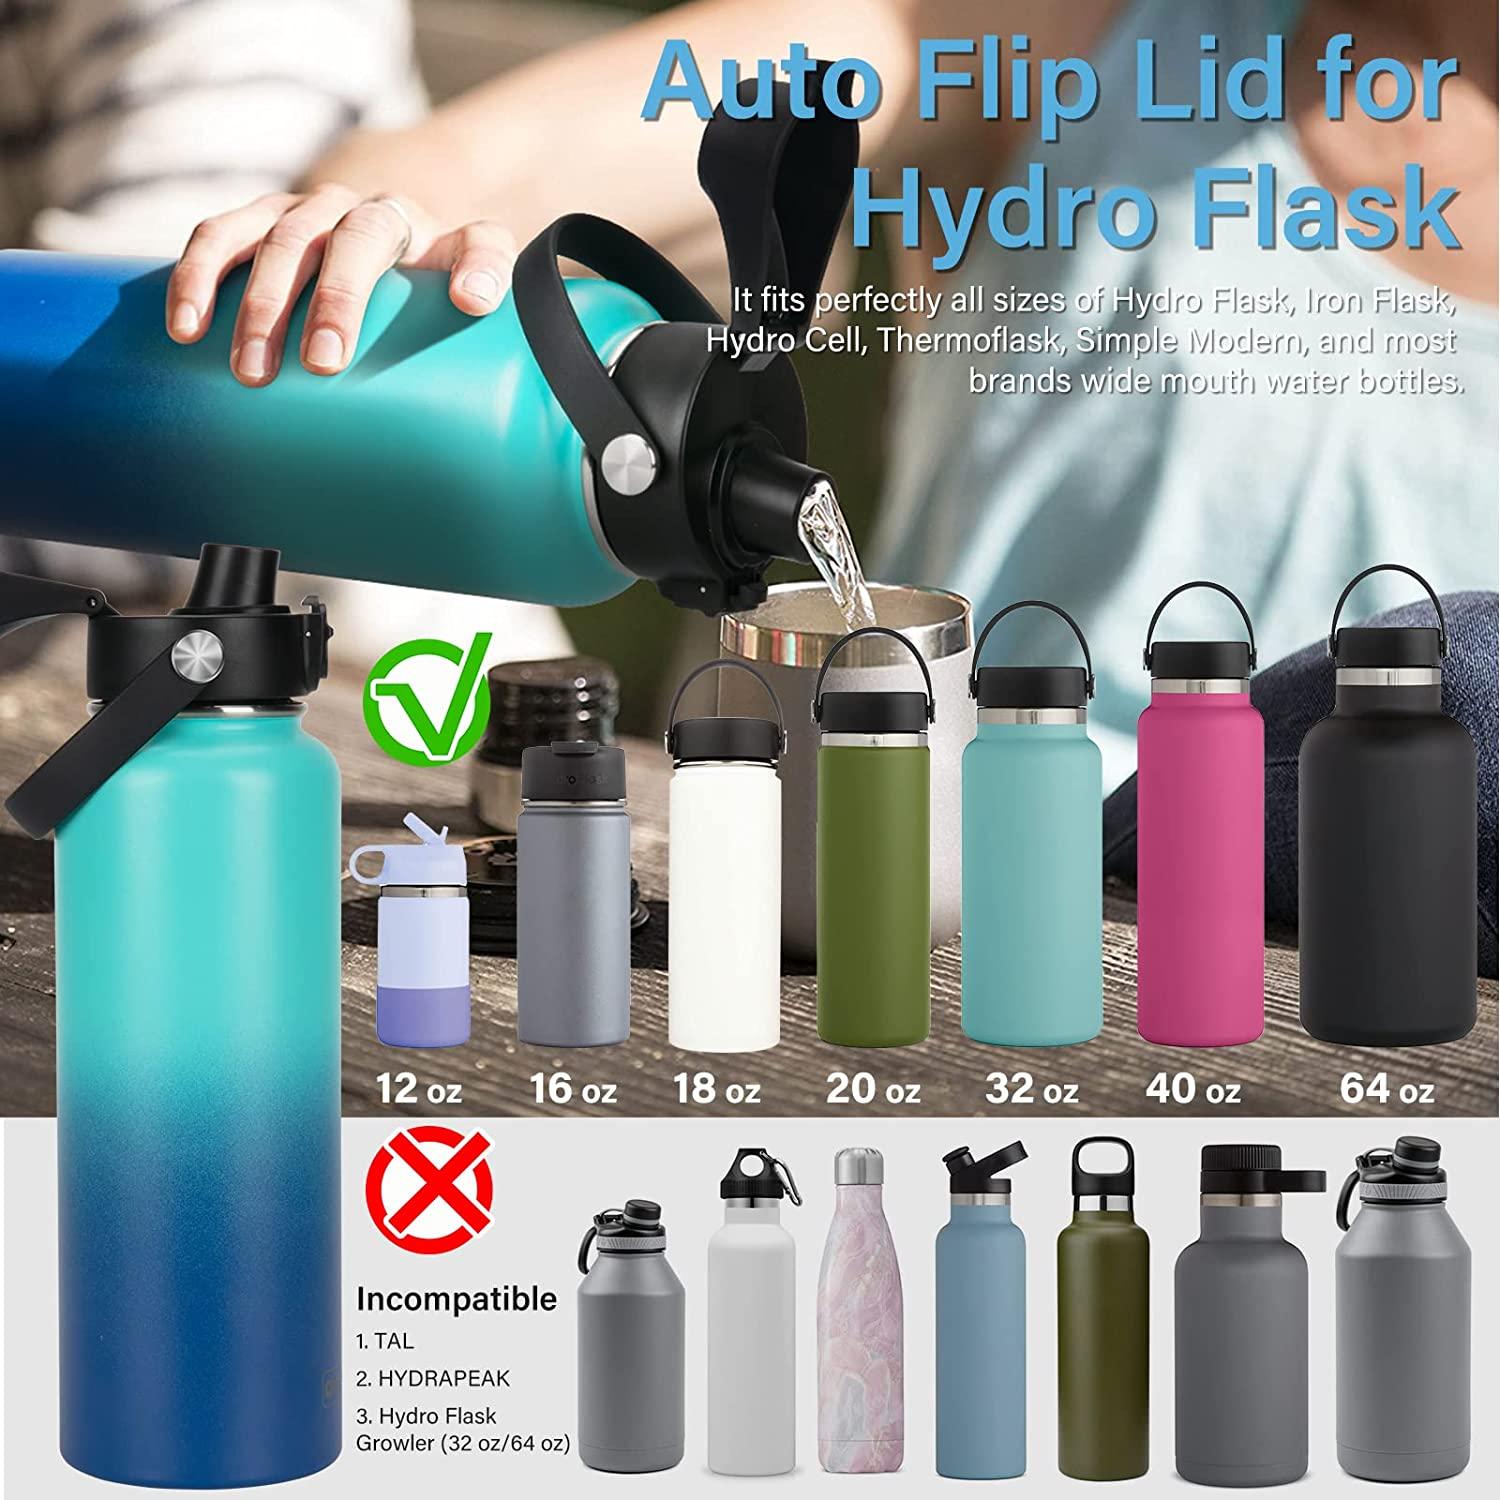 QIMUKKX Auto Flip Lid for Hydro Flask Wide Mouth 12, 16, 18, 20